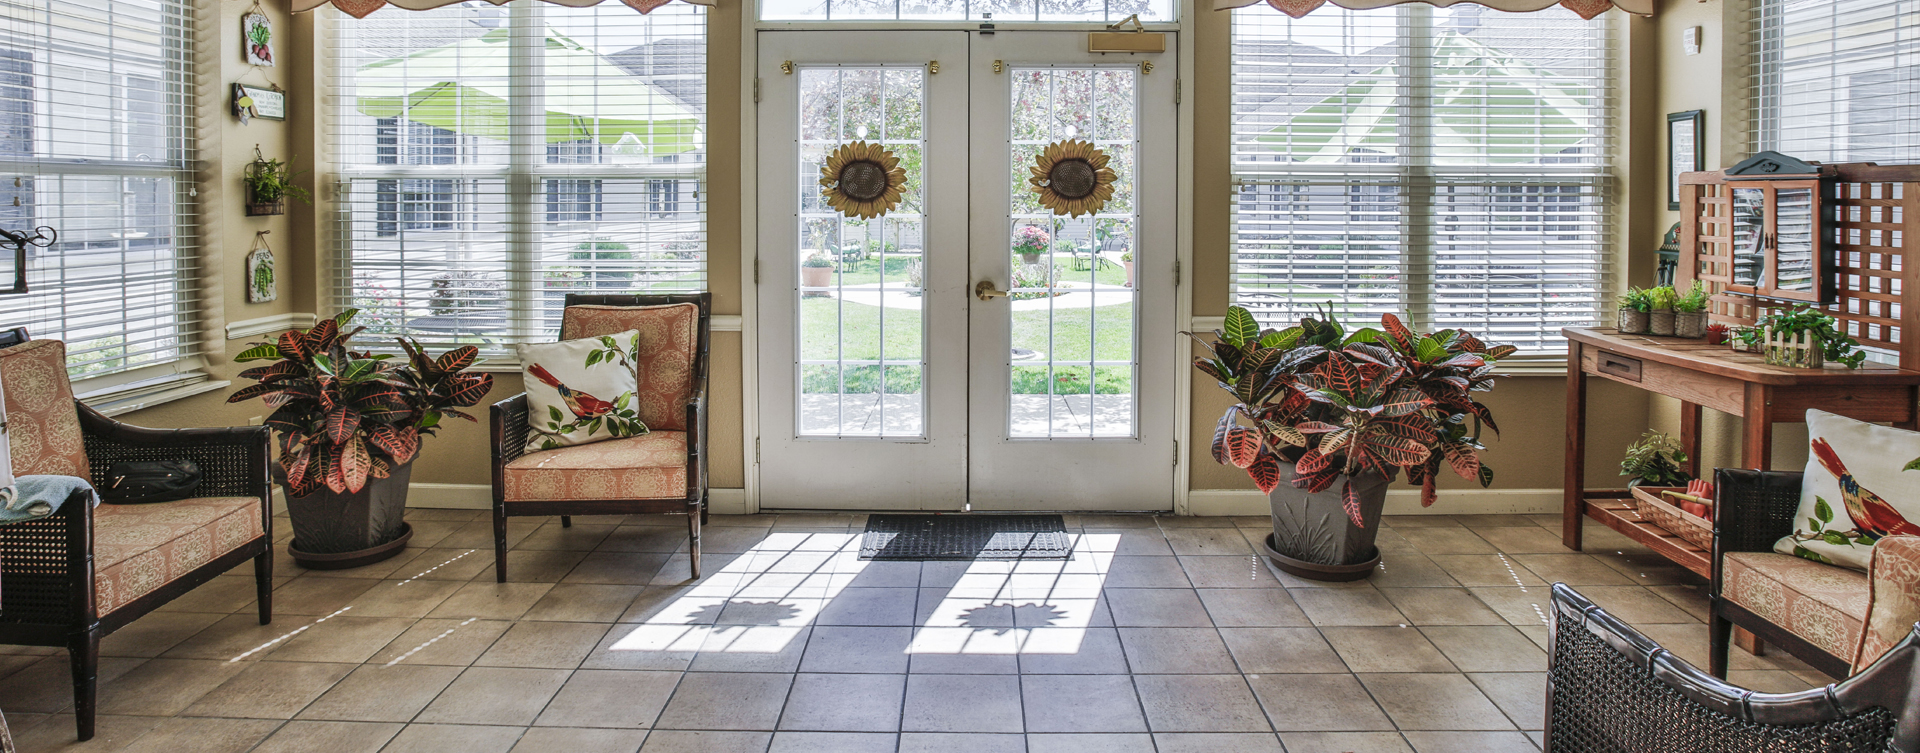 Enjoy the view of the outdoors from the sunroom at Bickford of Peoria